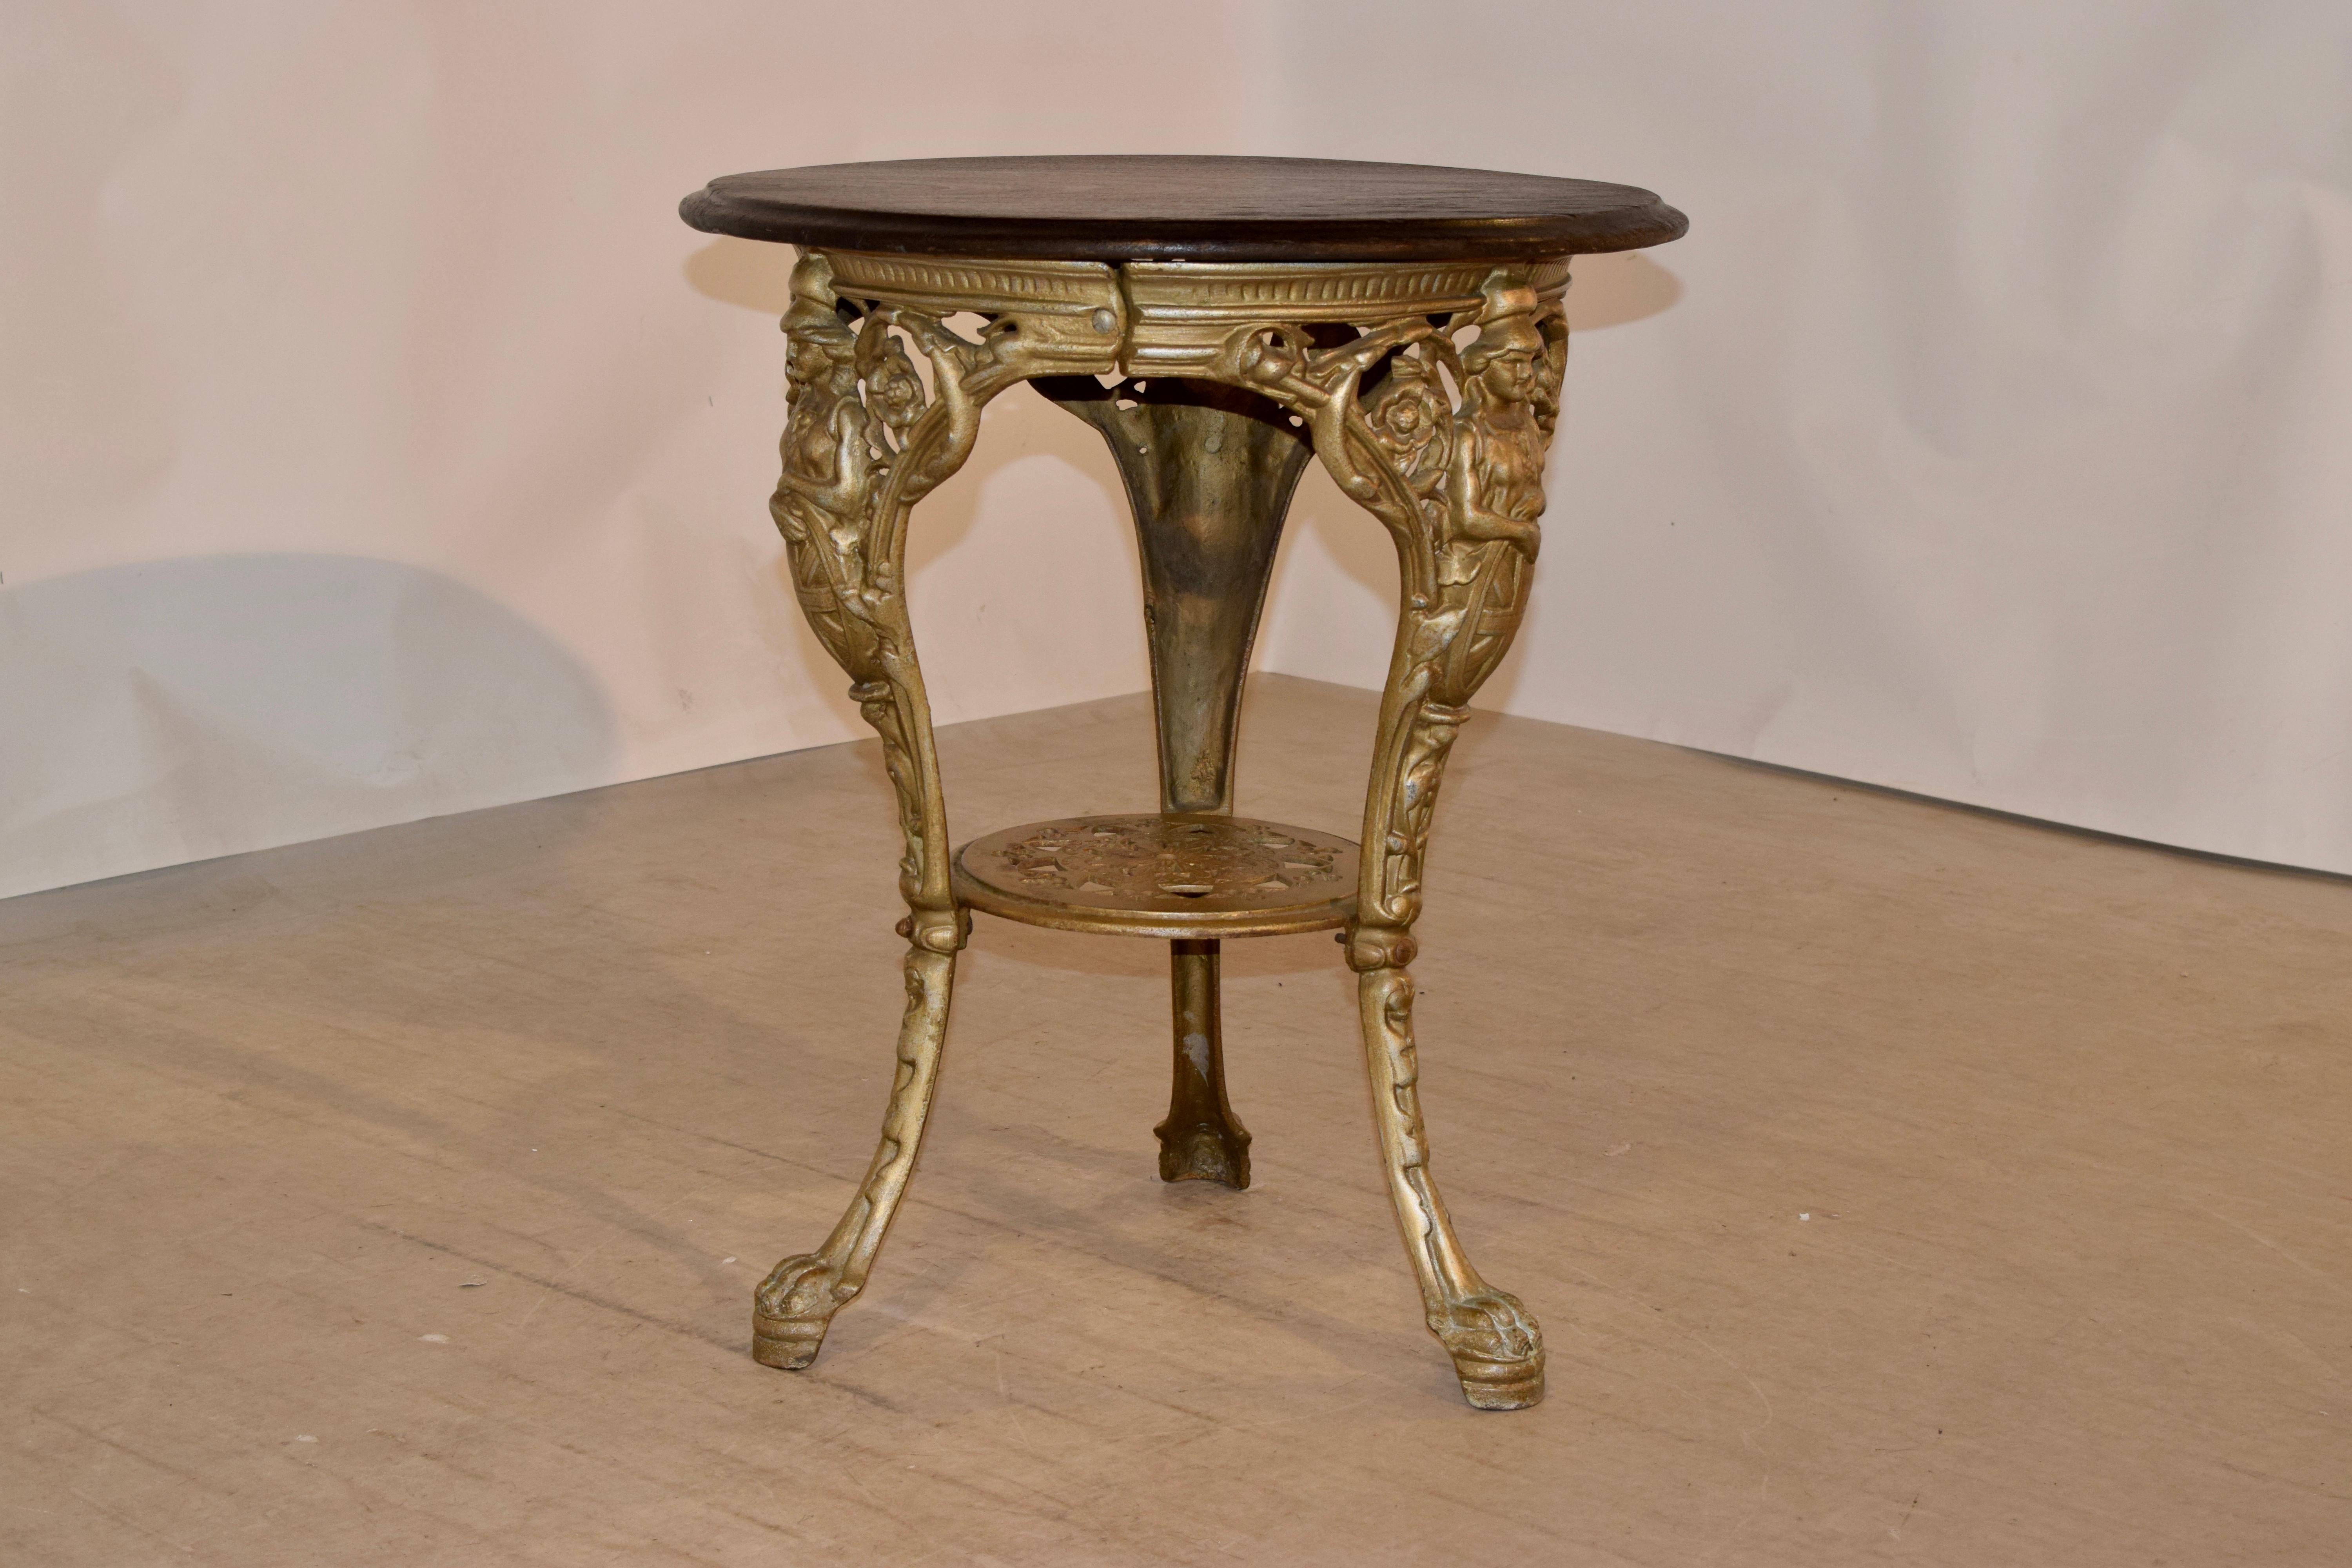 19th century English tables with iron base and mahogany top with a beveled edge around the top. The legs of the table have Brittania over the shields of England, and the legs end in paws.